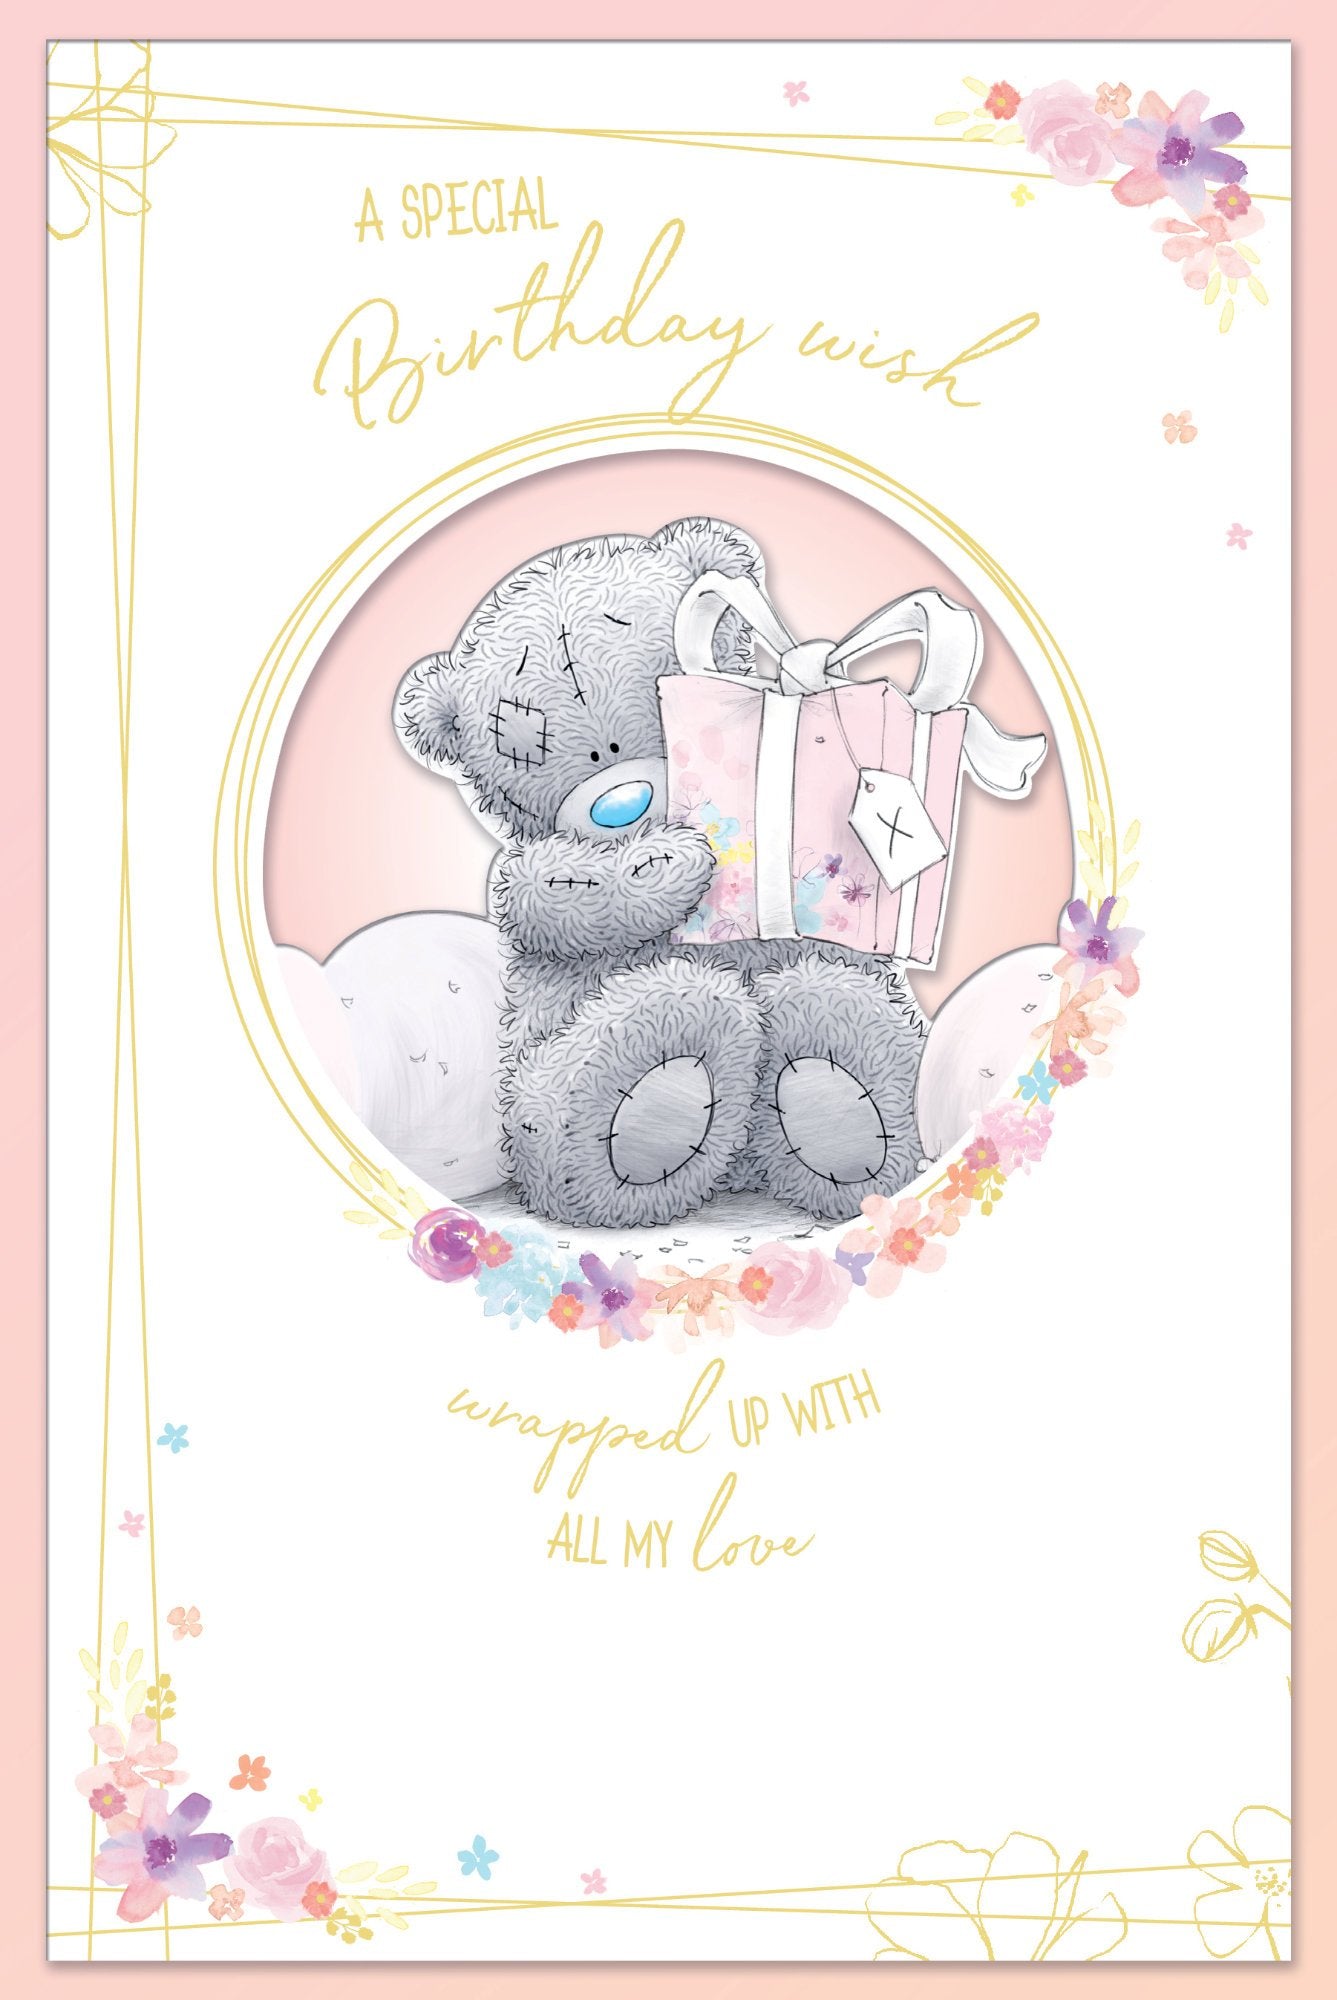 Photograph of Bear Holding Birthday Present Greetings Card at Nicole's Shop